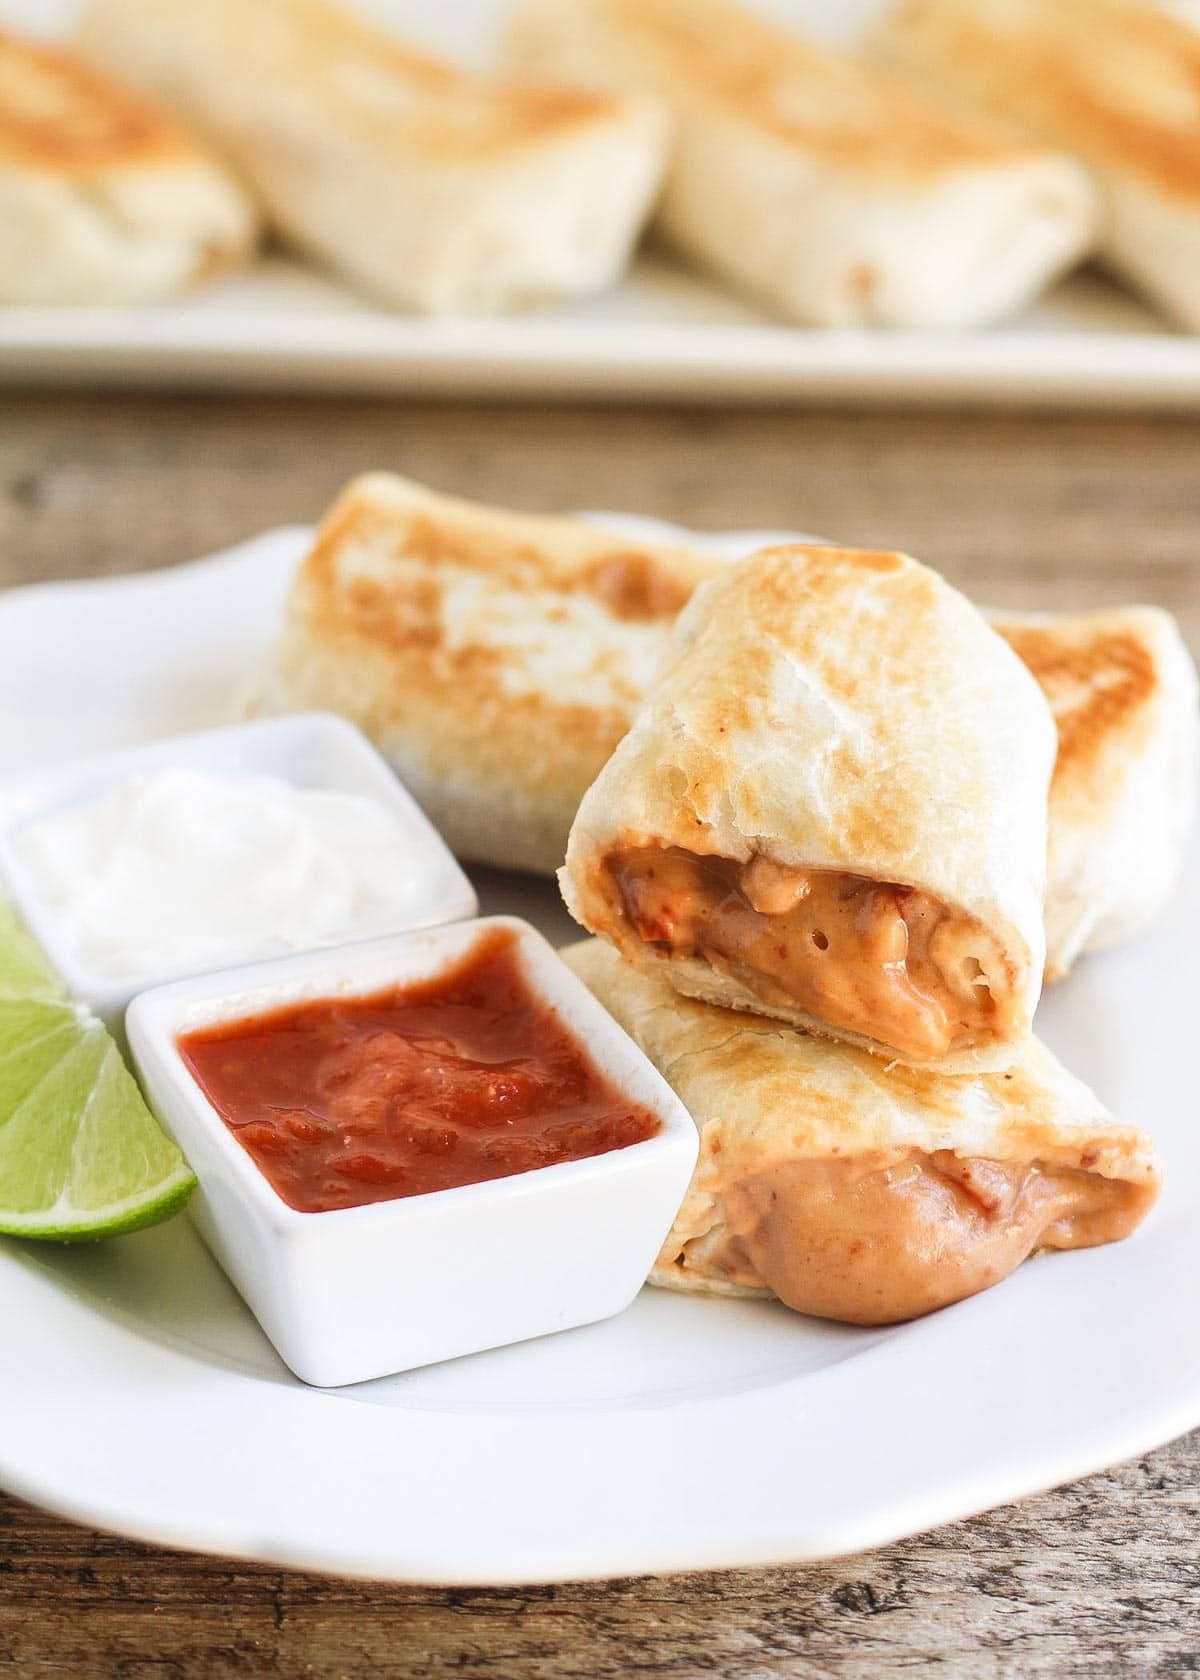 Bean and cheese chimichanga on a plate with salsa and sour cream